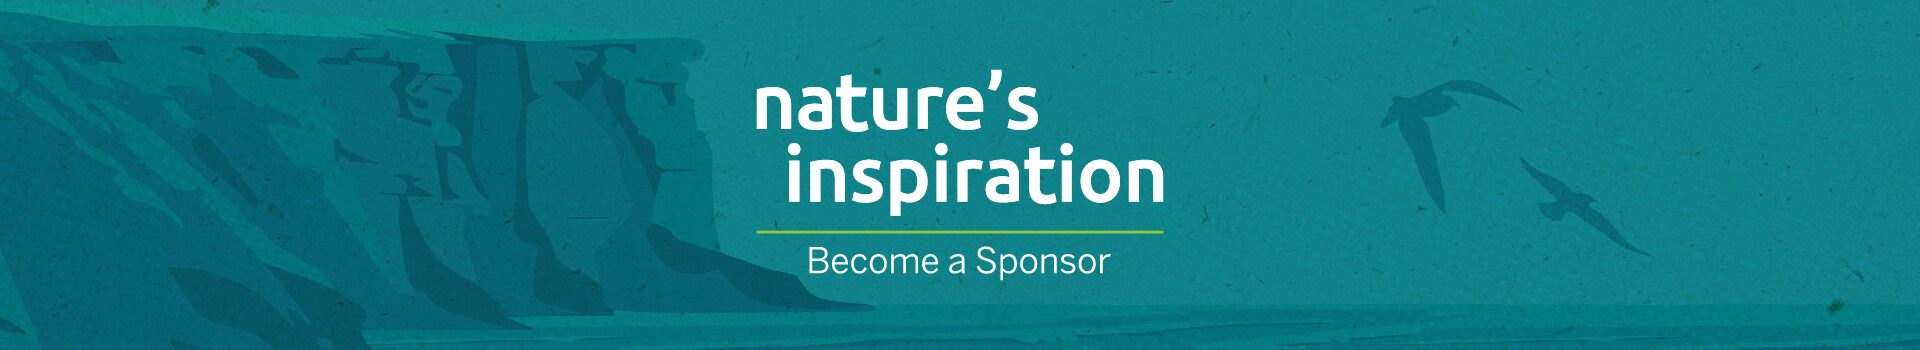 Nature's Inspiration "become a sponsor" banner 2024 with background image of the coast